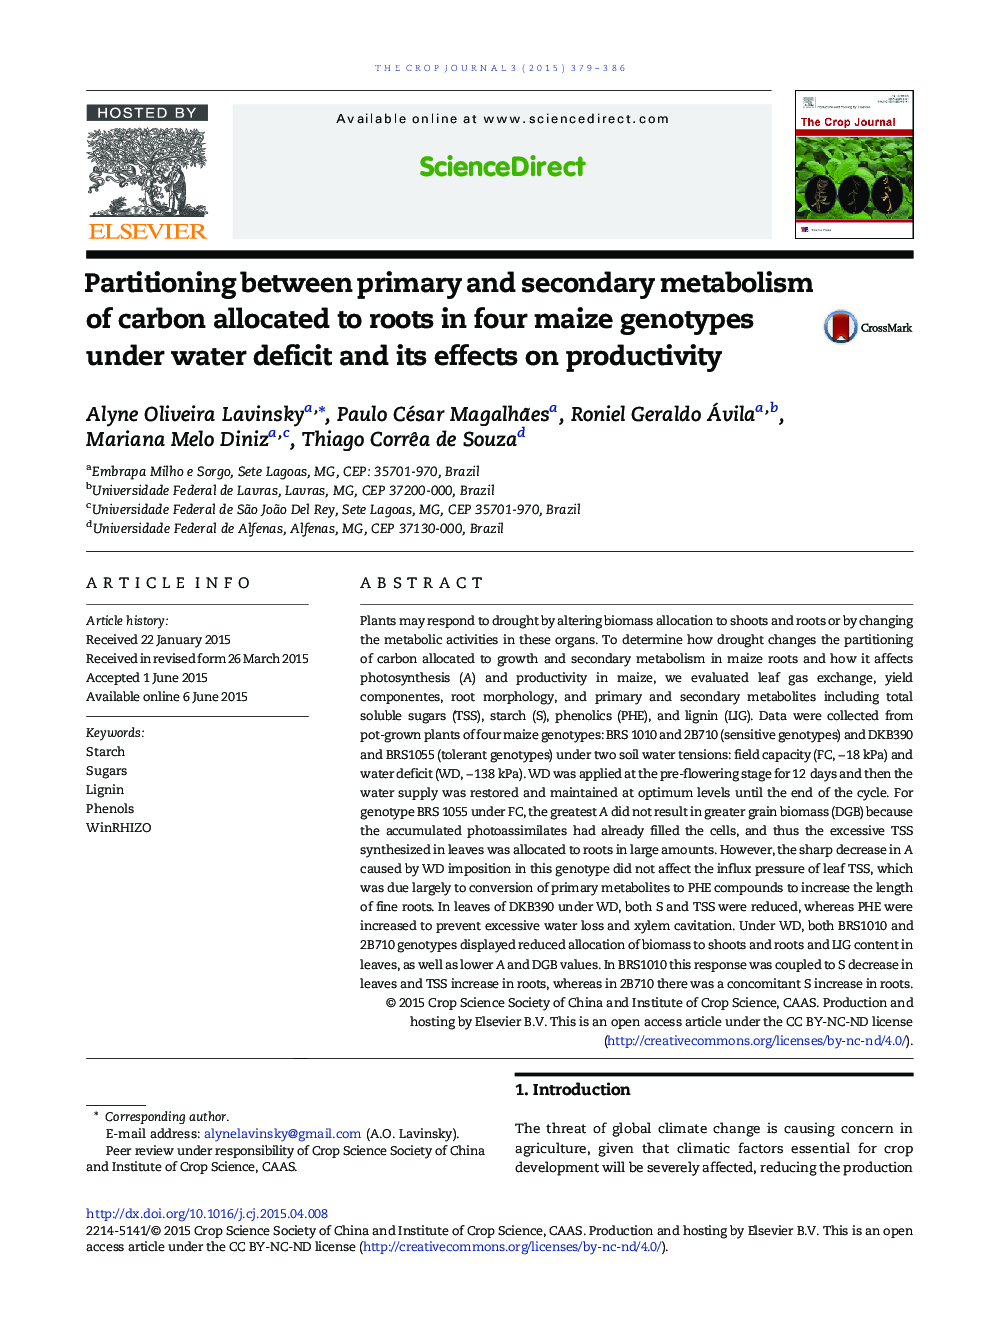 Partitioning between primary and secondary metabolism of carbon allocated to roots in four maize genotypes under water deficit and its effects on productivity 